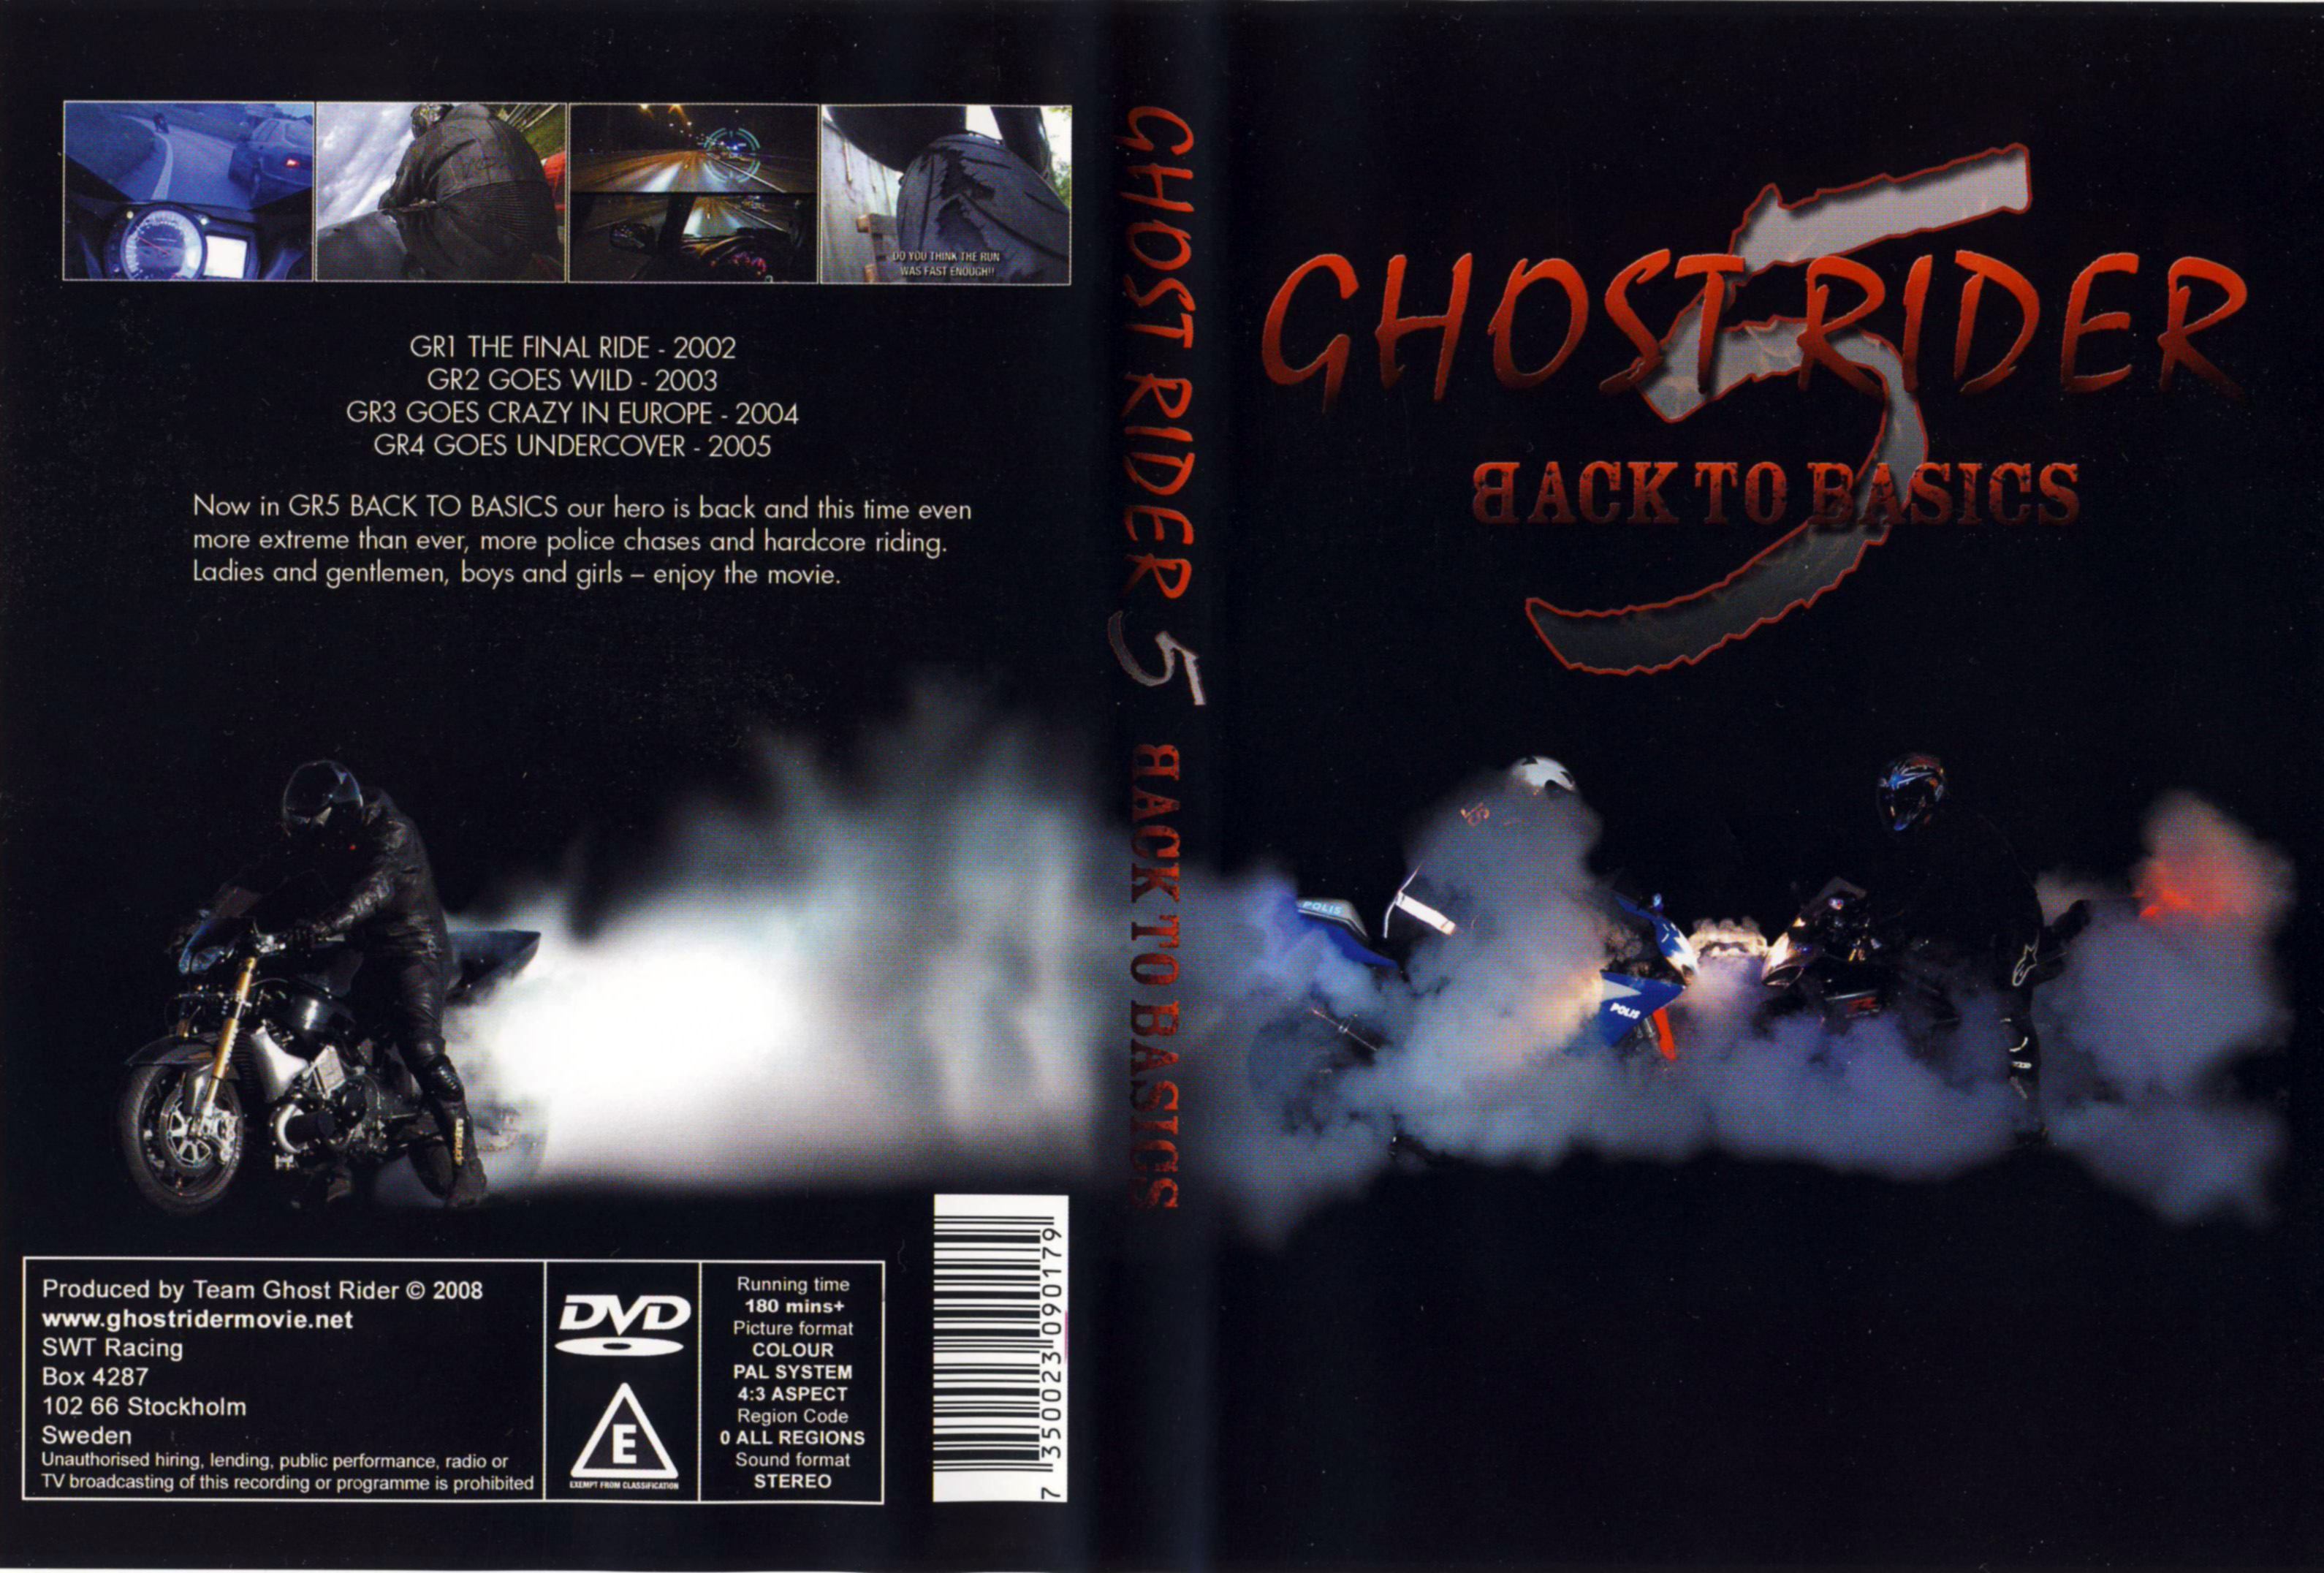 Jaquette DVD Ghost rider 5 Back to basics